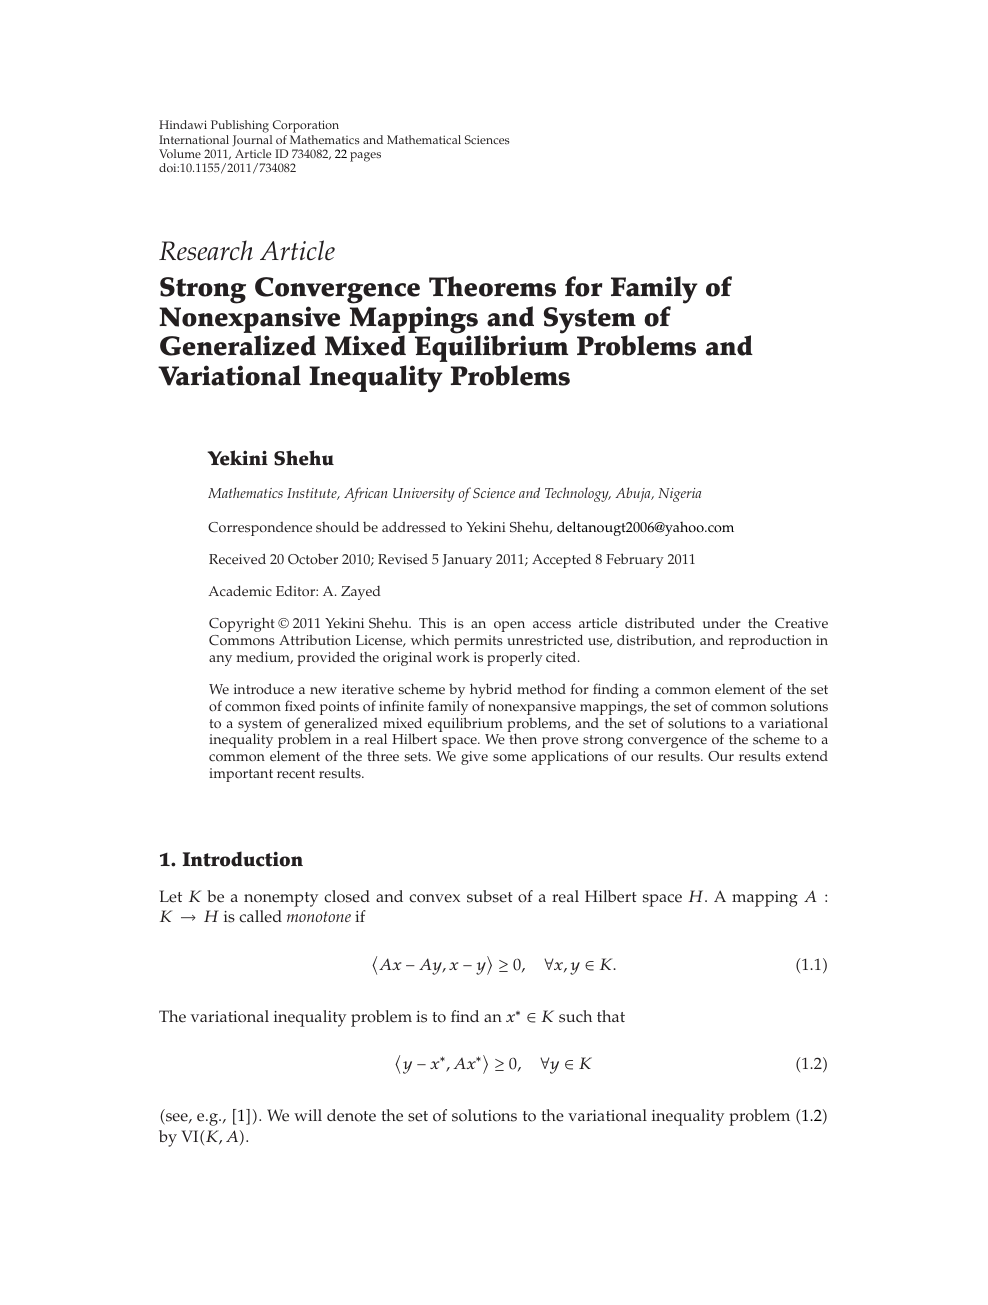 Strong Convergence Theorems For Family Of Nonexpansive Mappings And System Of Generalized Mixed Equilibrium Problems And Variational Inequality Problems Topic Of Research Paper In Mathematics Download Scholarly Article Pdf And Read